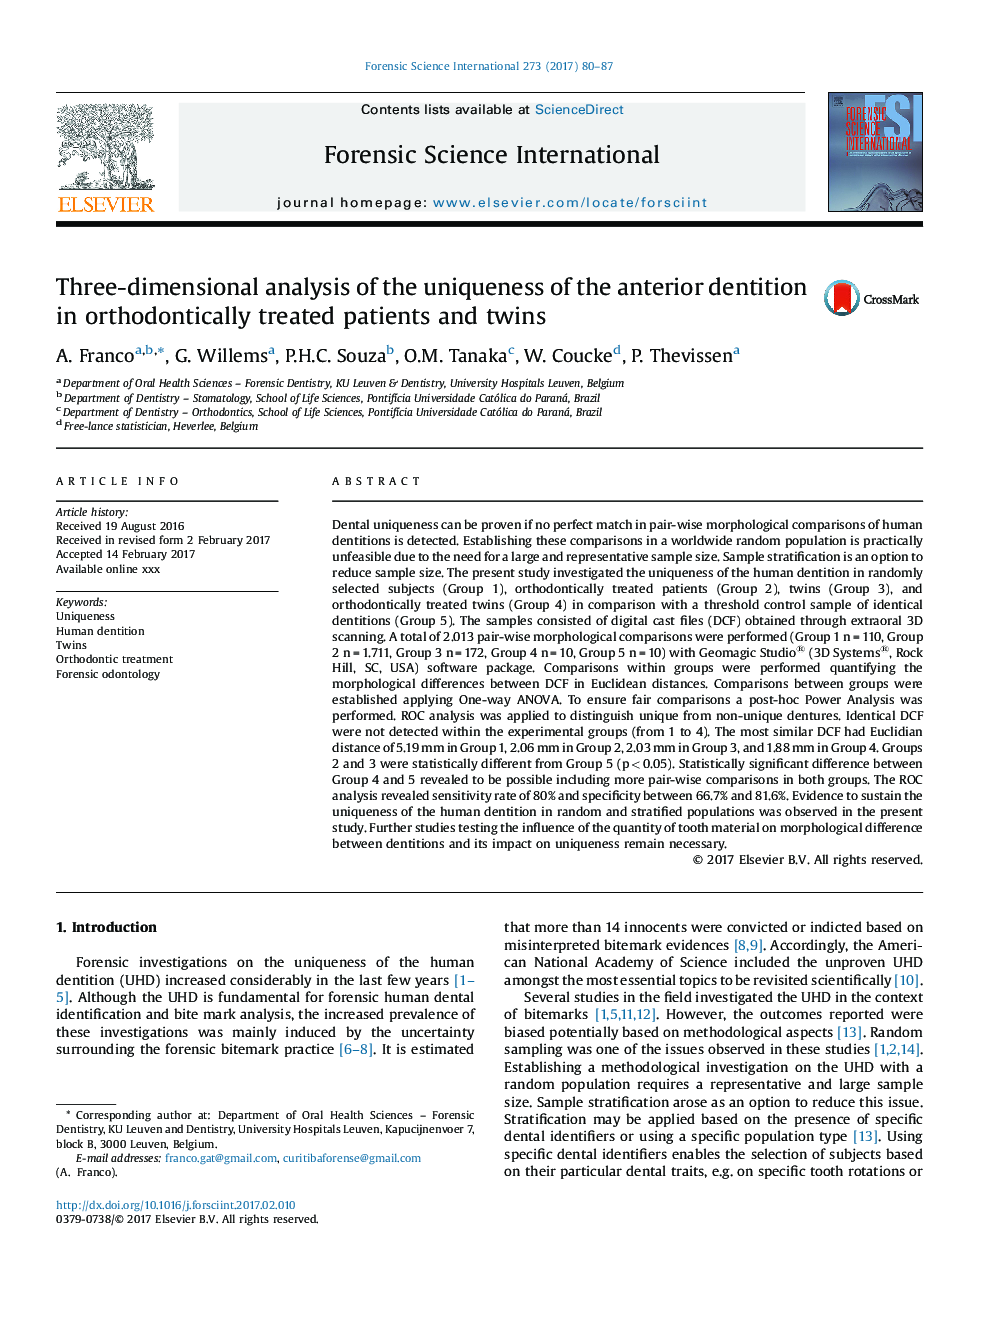 Three-dimensional analysis of the uniqueness of the anterior dentition in orthodontically treated patients and twins